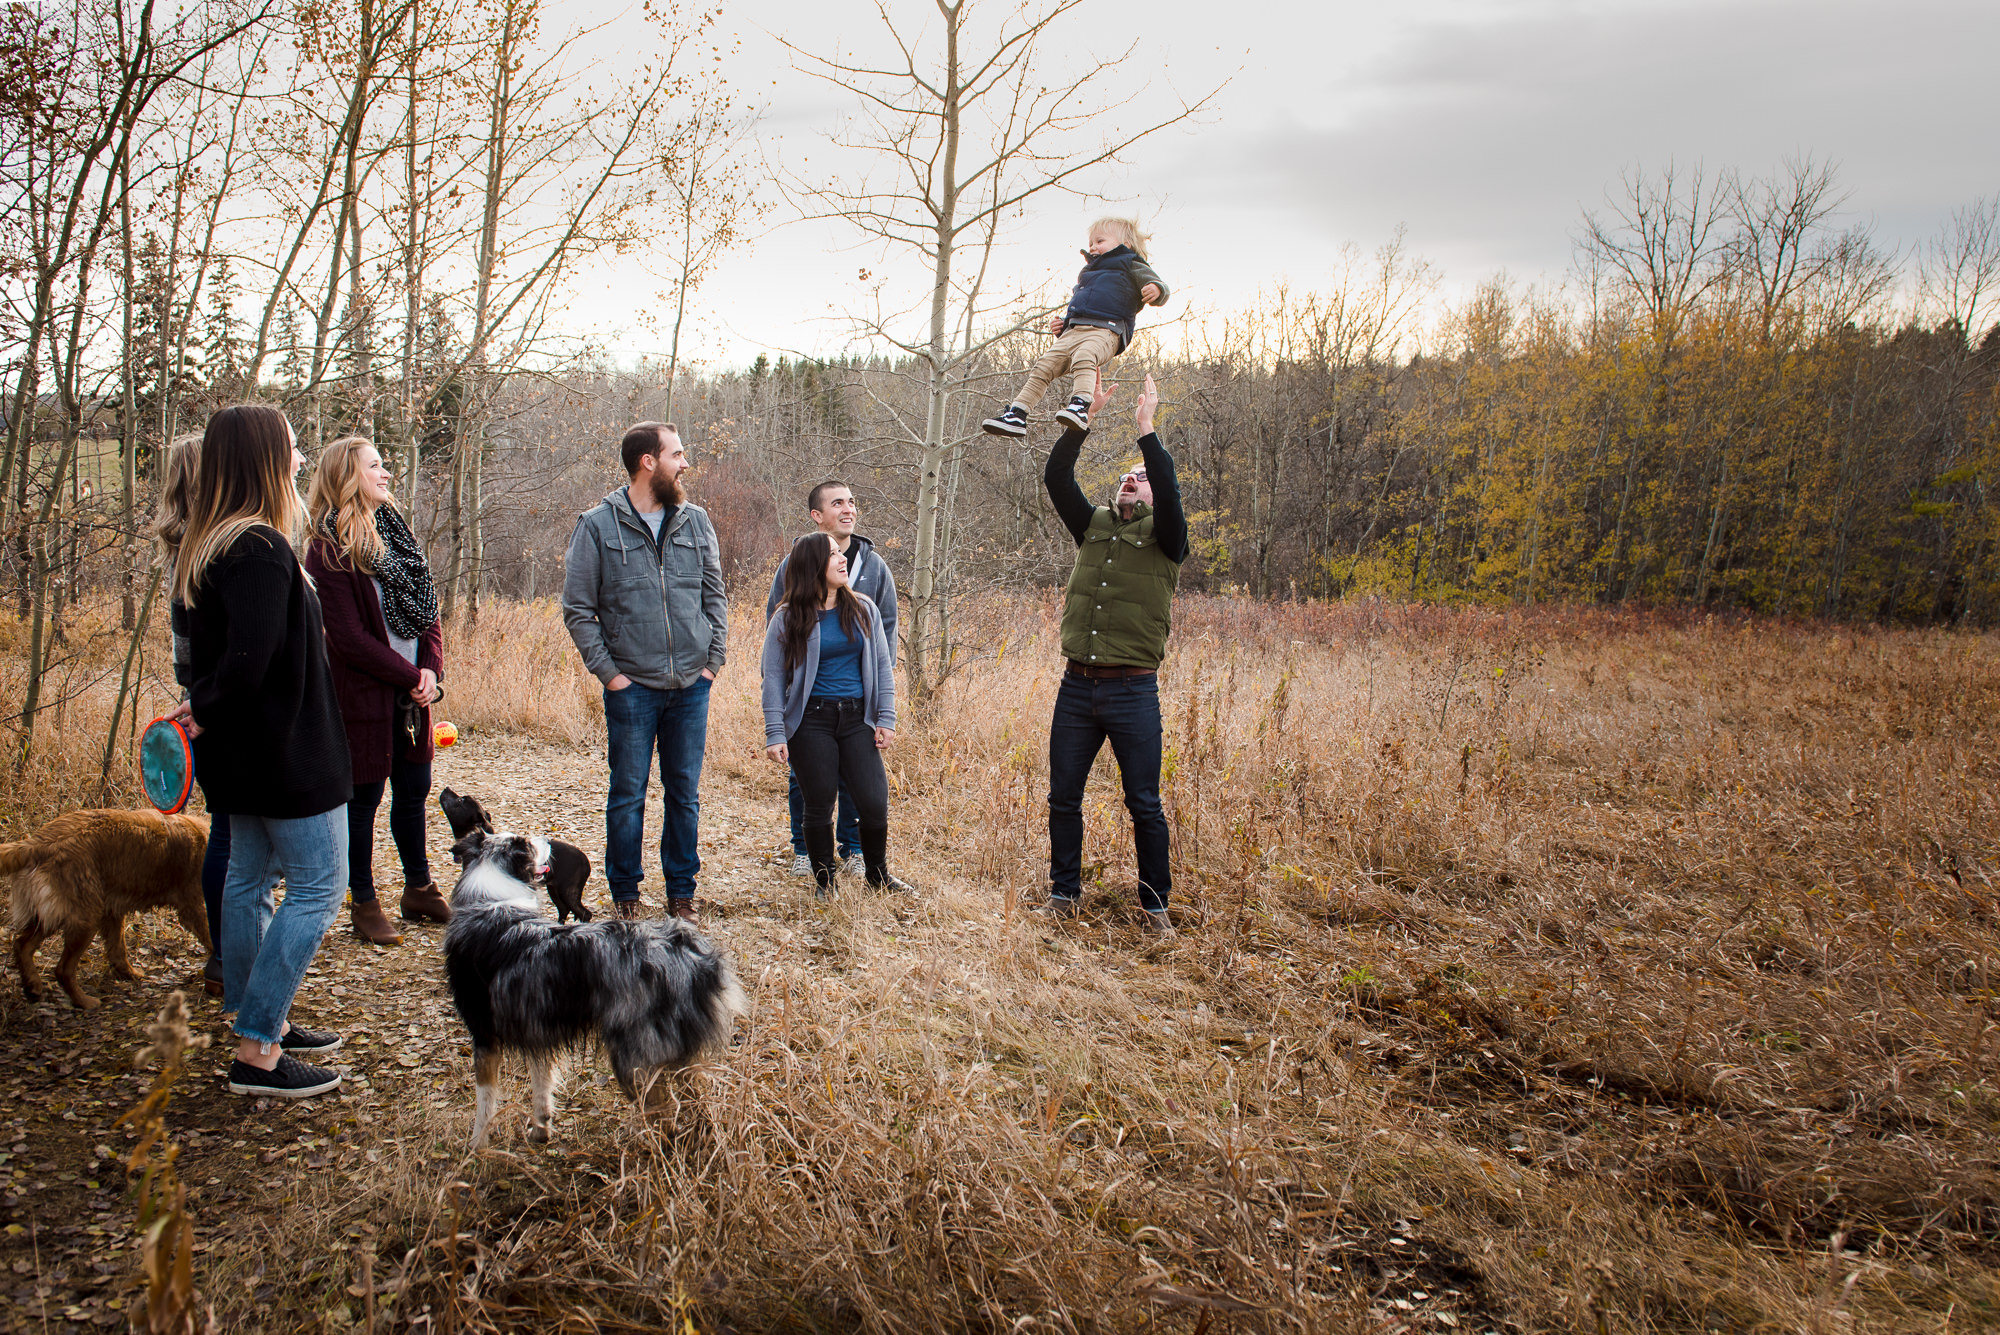 An extended lifestyle family photo session in Sherwood Park, Alberta